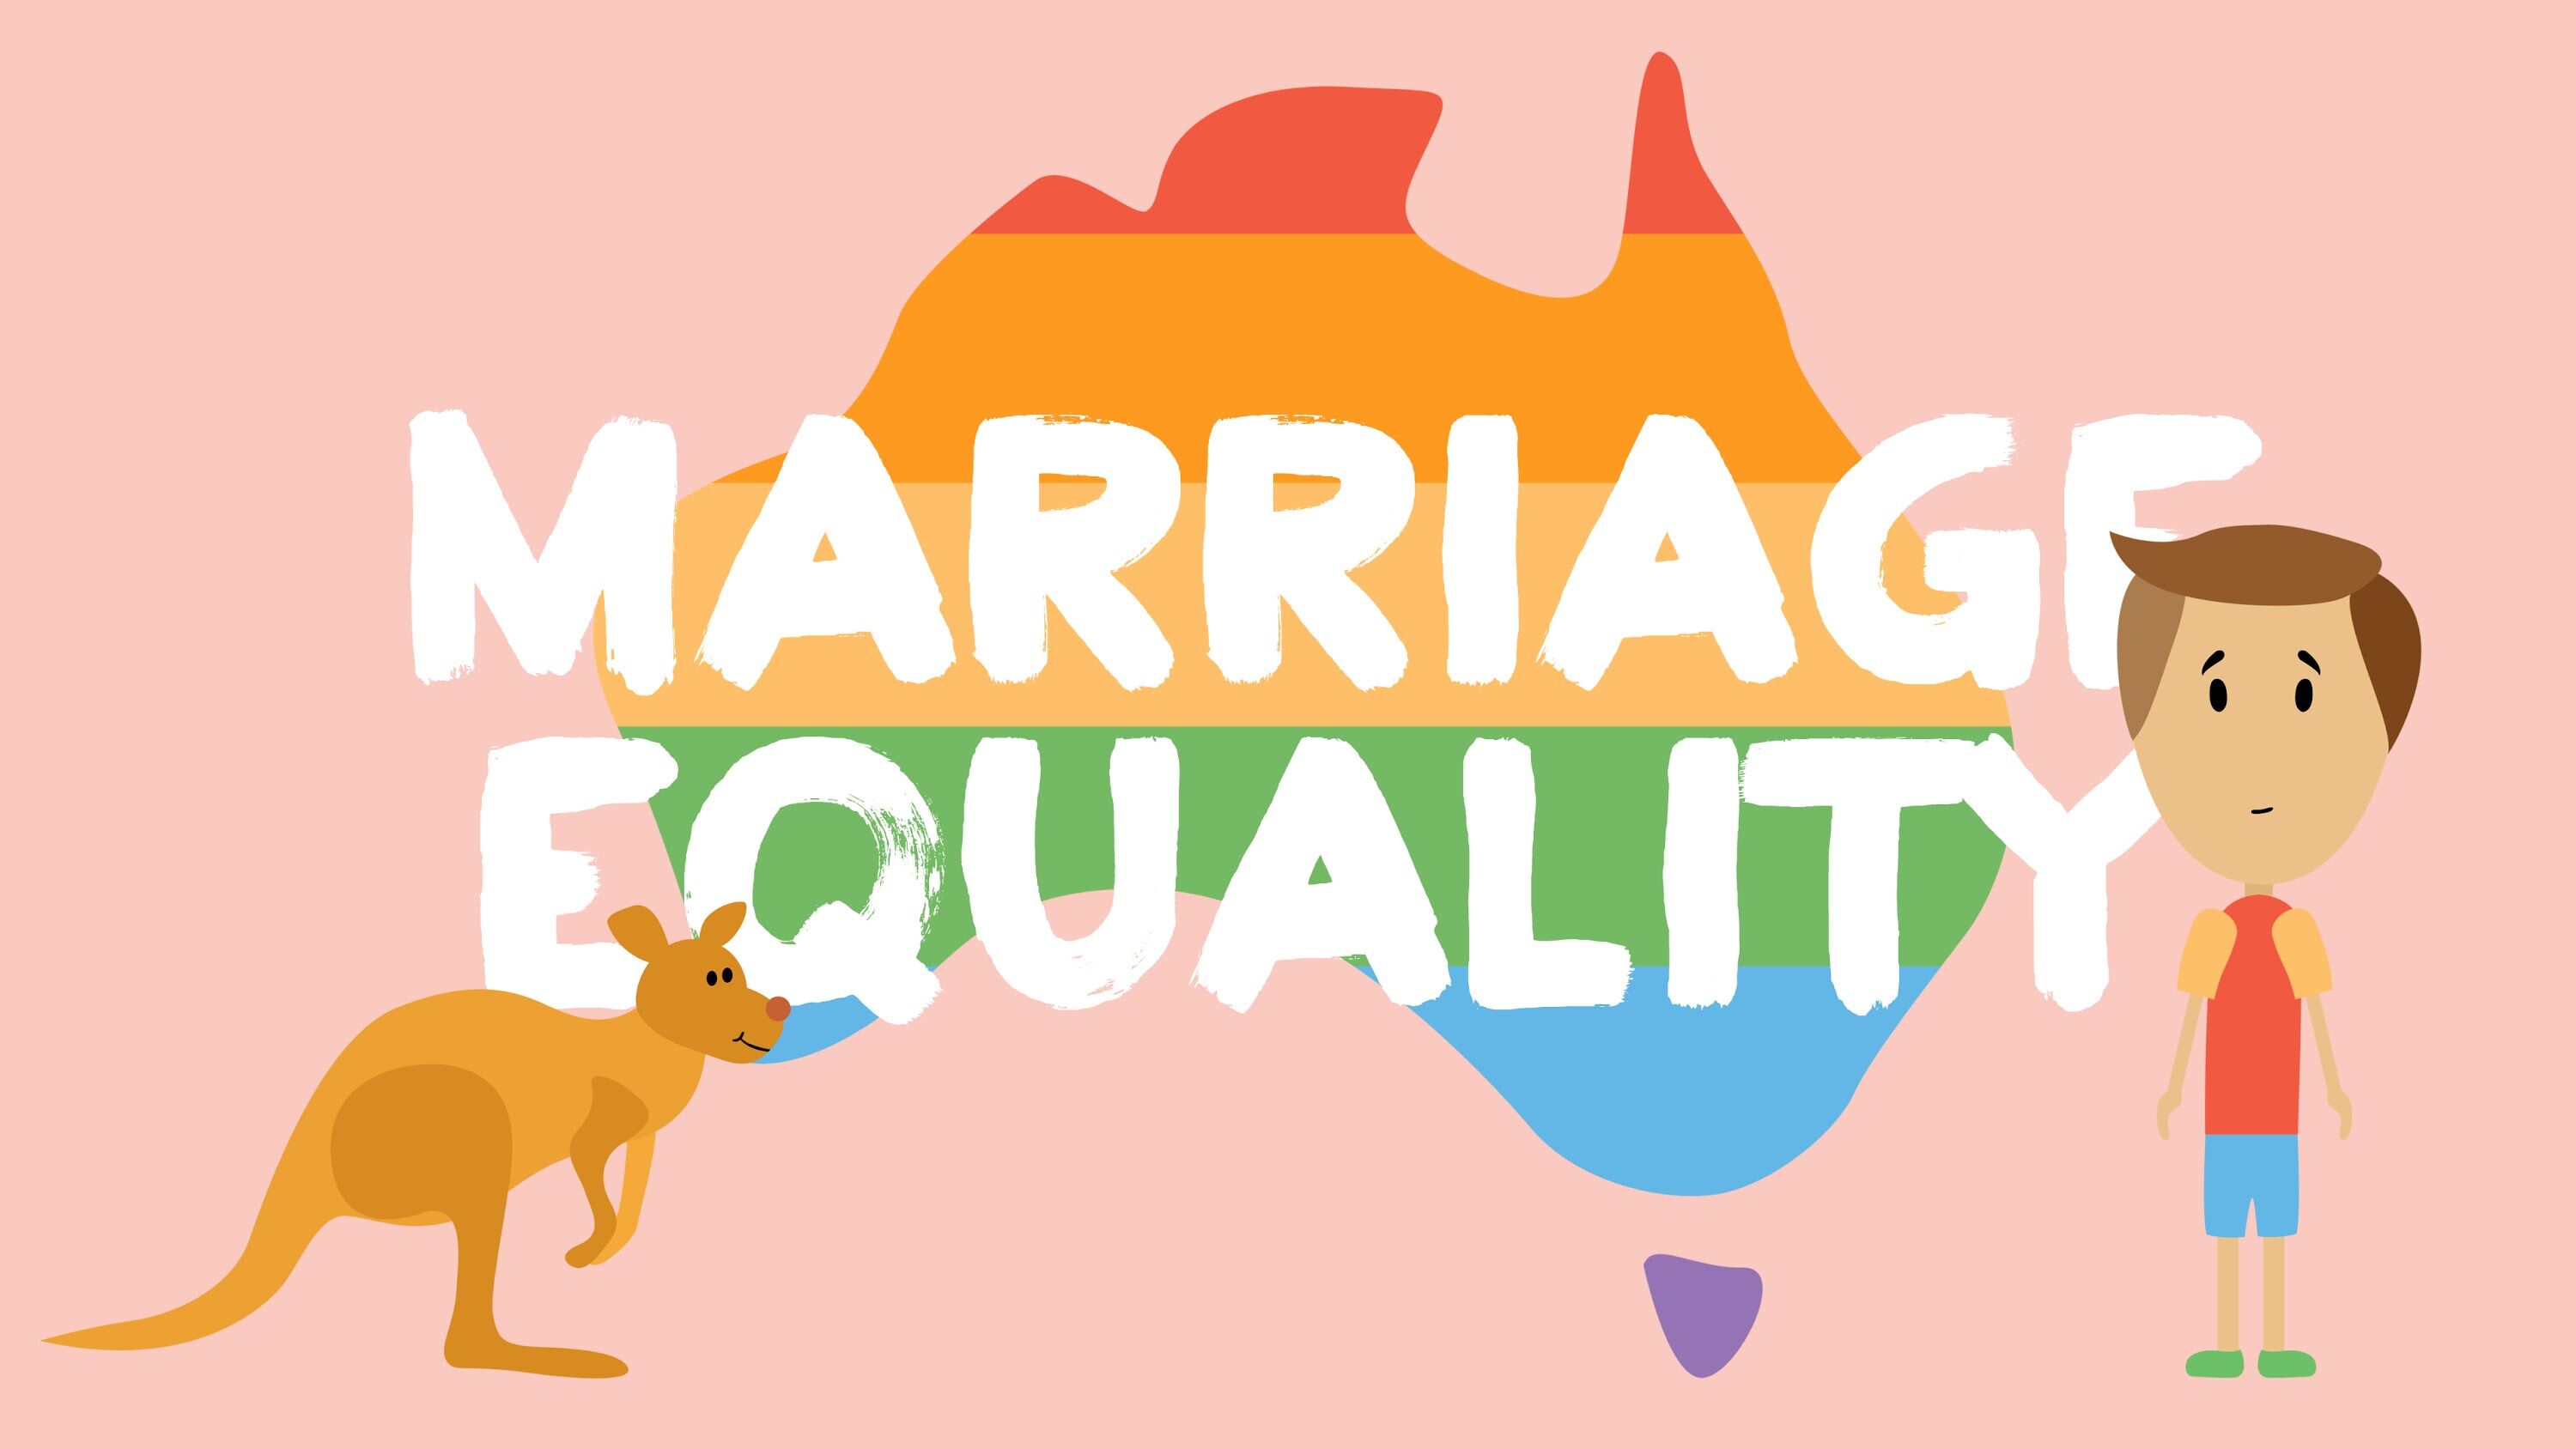 Australian politicians will introduce bills to legalize same-sex marriage